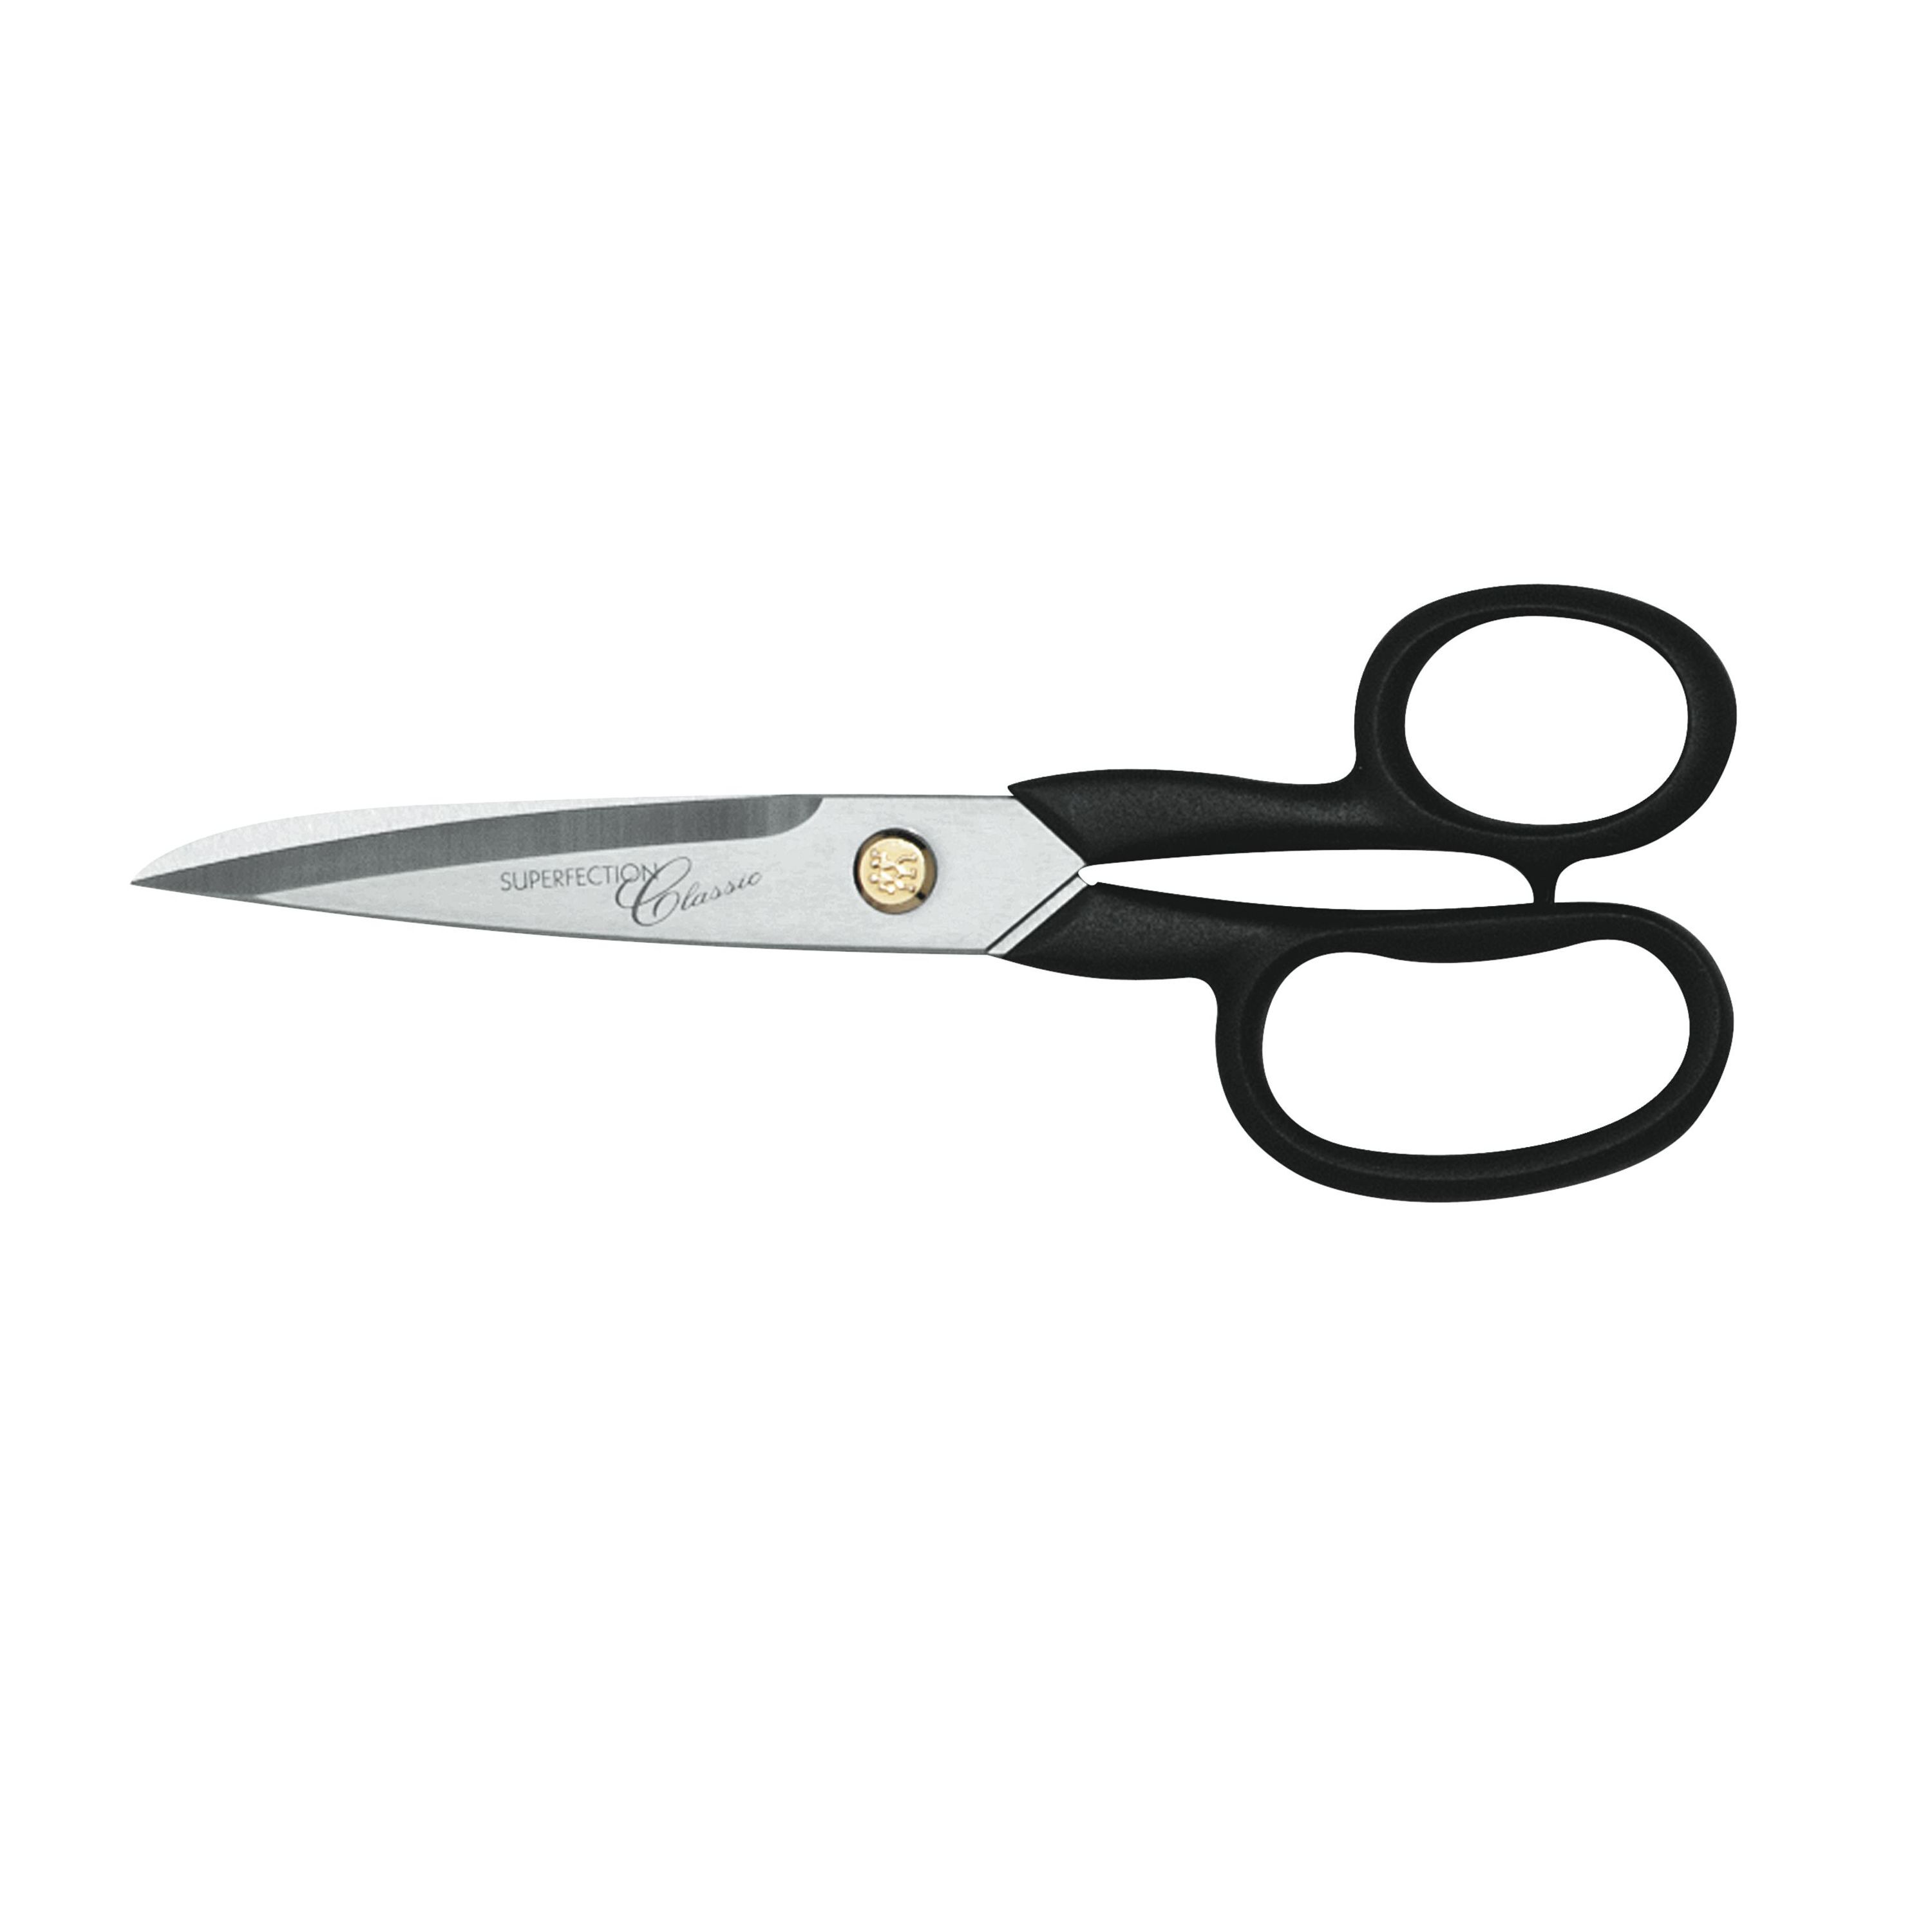 Zwilling Household Scissors Superfection Classic 180 Mm Japan for sale online 